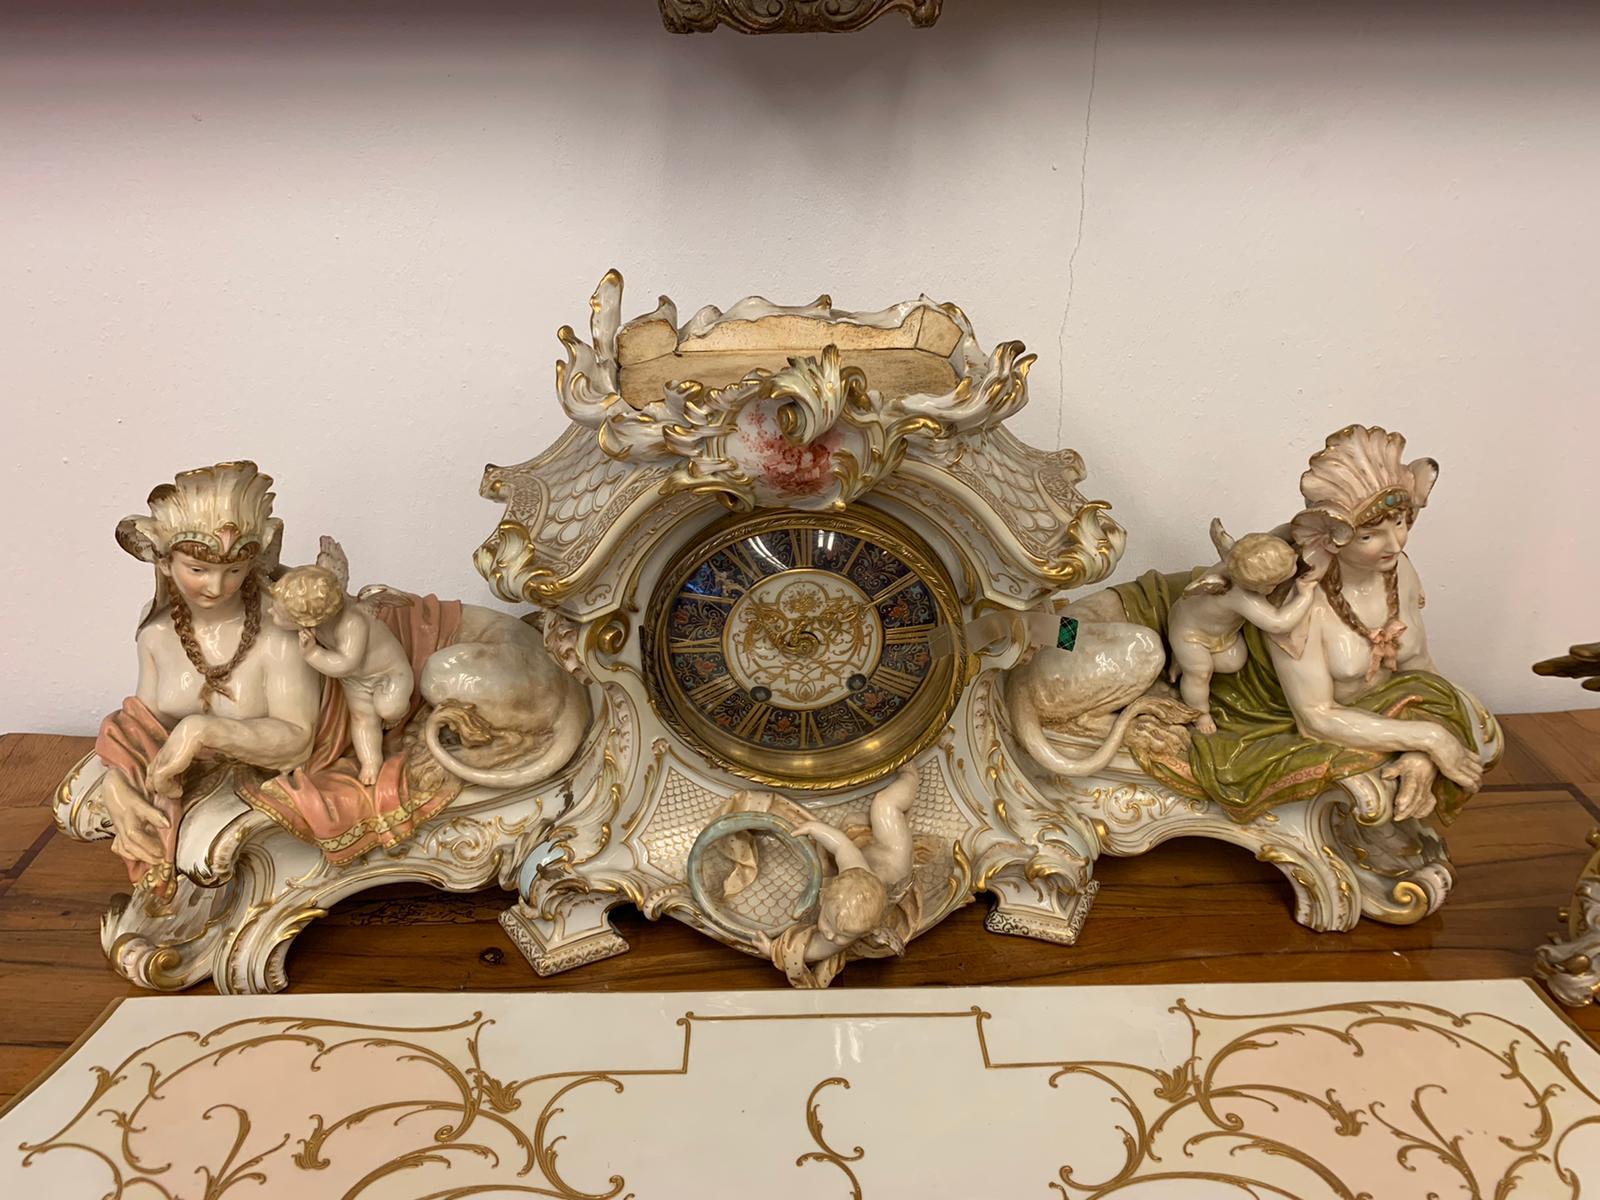 Porcelain Fireplace-Mantel Clock with Two Sphinxes and Cherubs KPM, Berlin 11